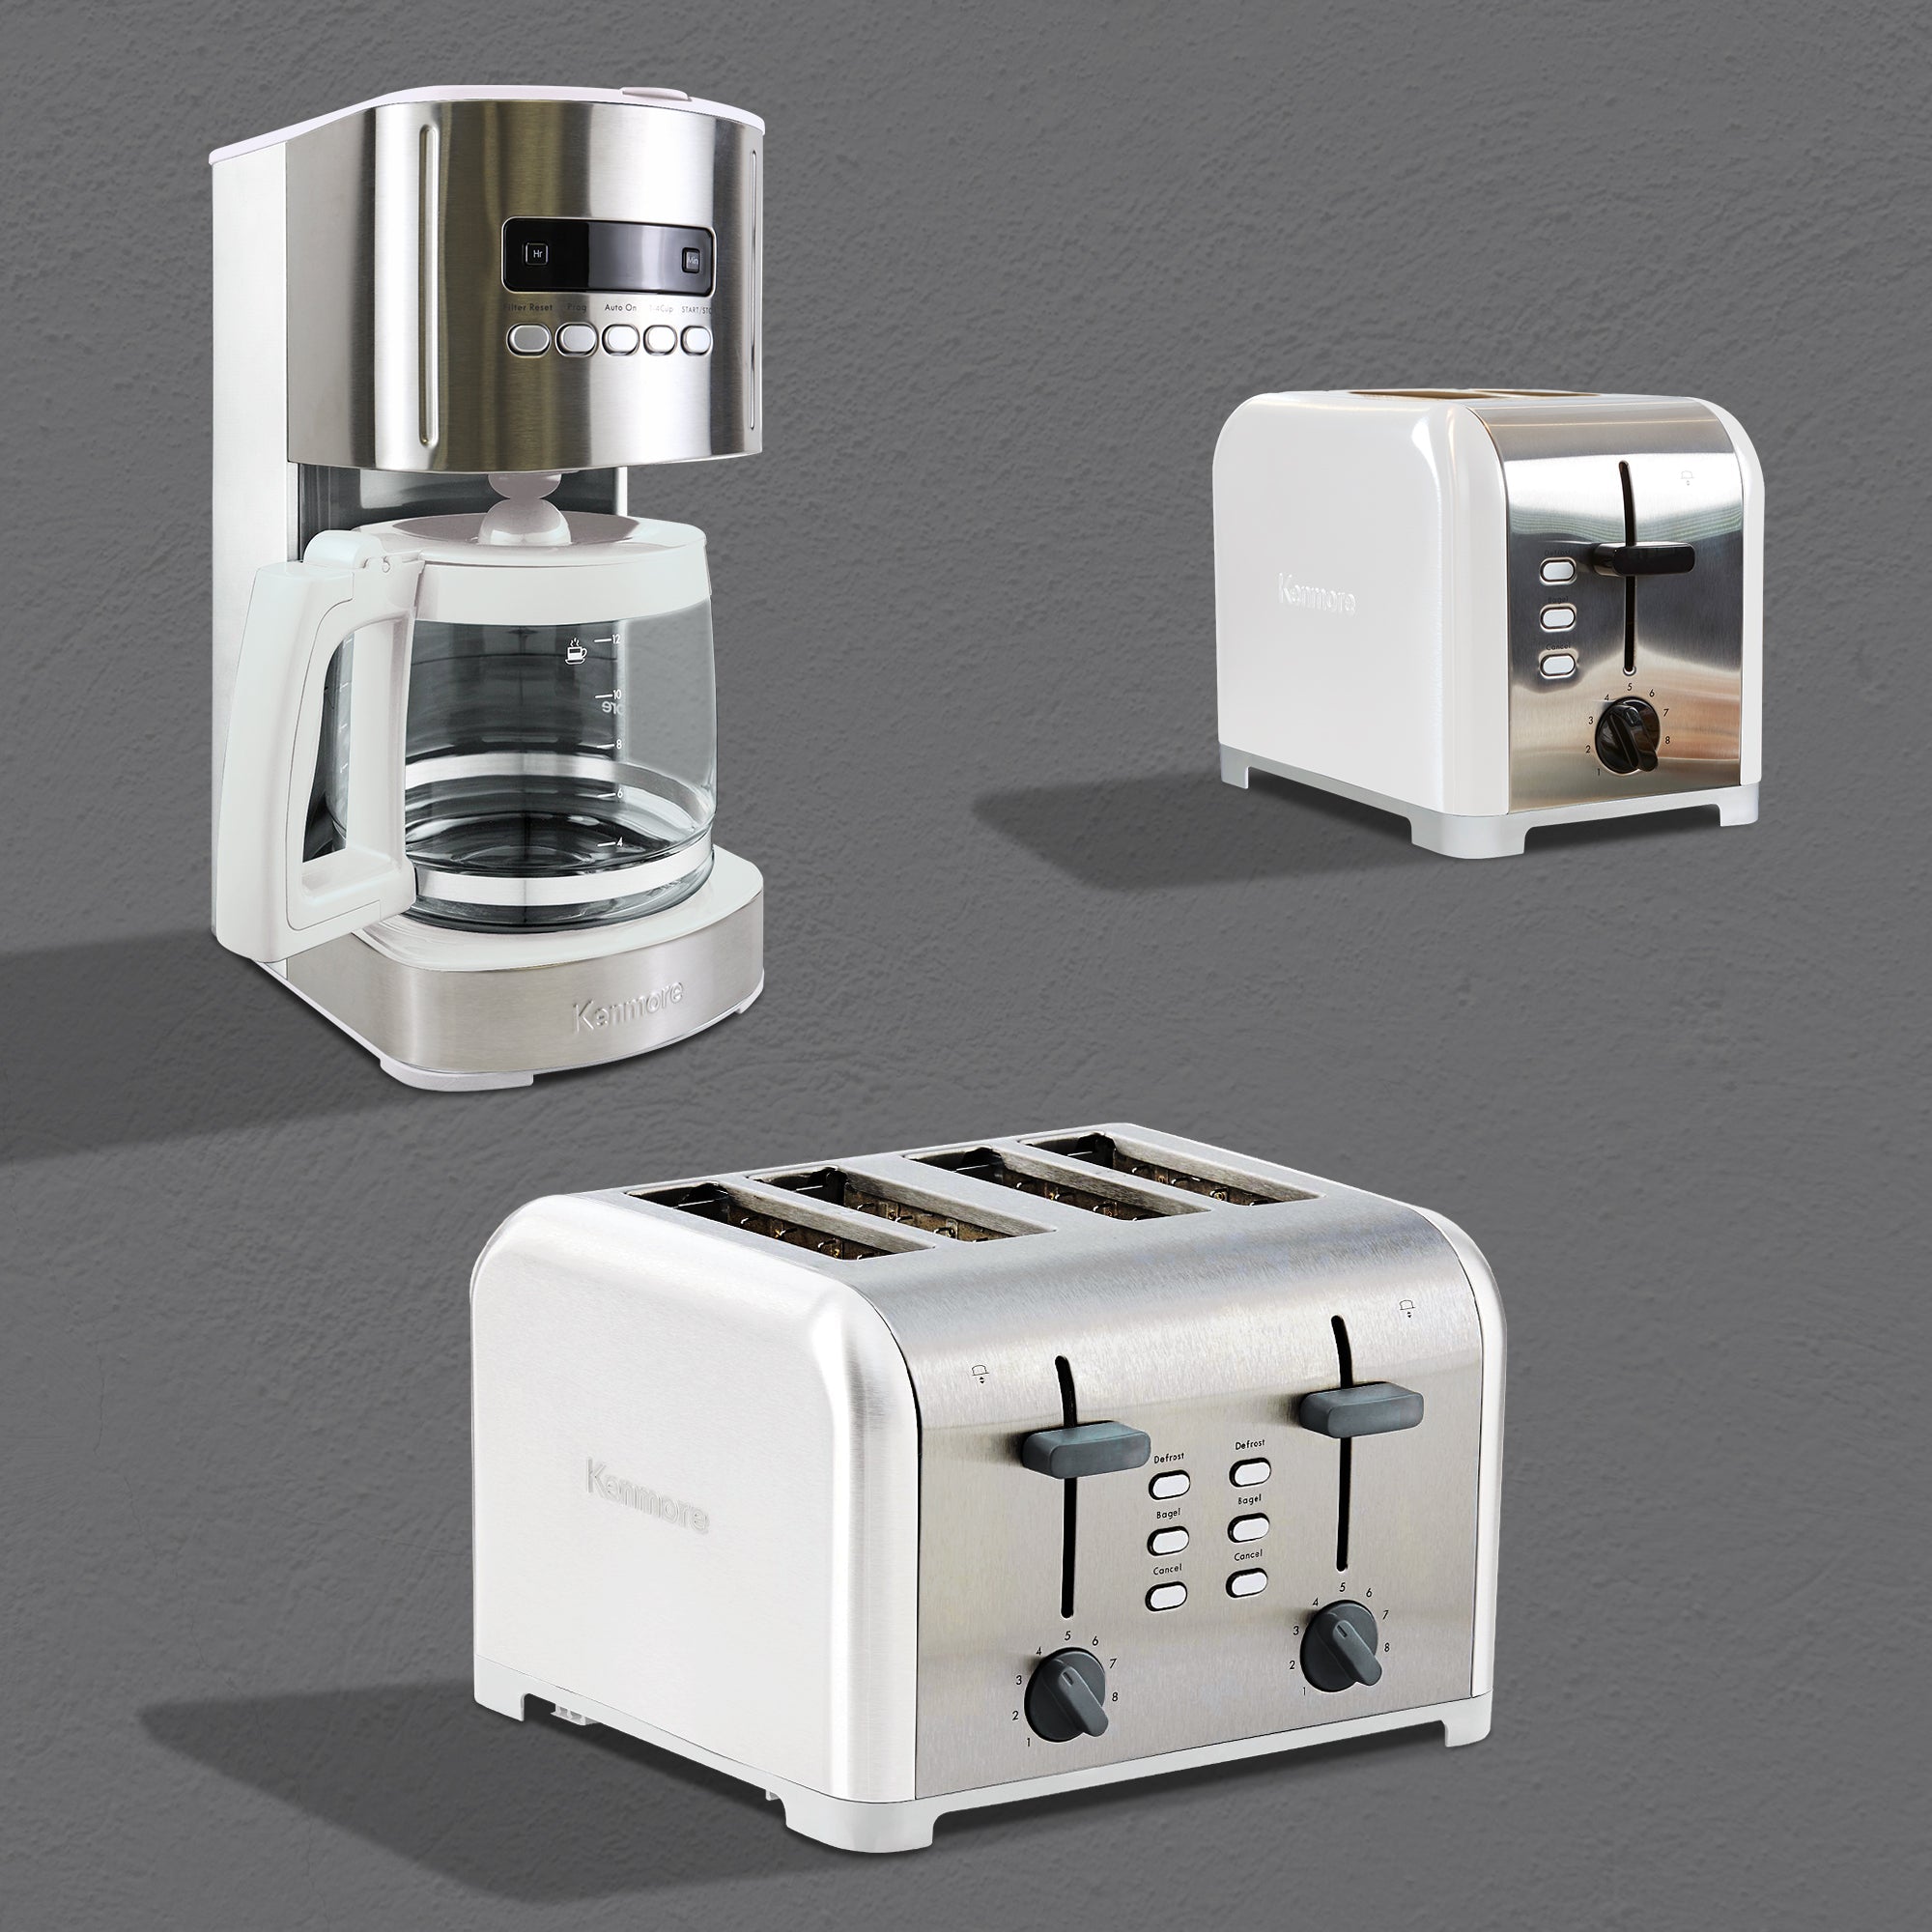 Three product shots on a dark gray background show matching Kenmore small appliances: 12-Cup Programmable Coffee Maker; 2-Slice Toaster; 4-Slice Toaster with Dual Controls